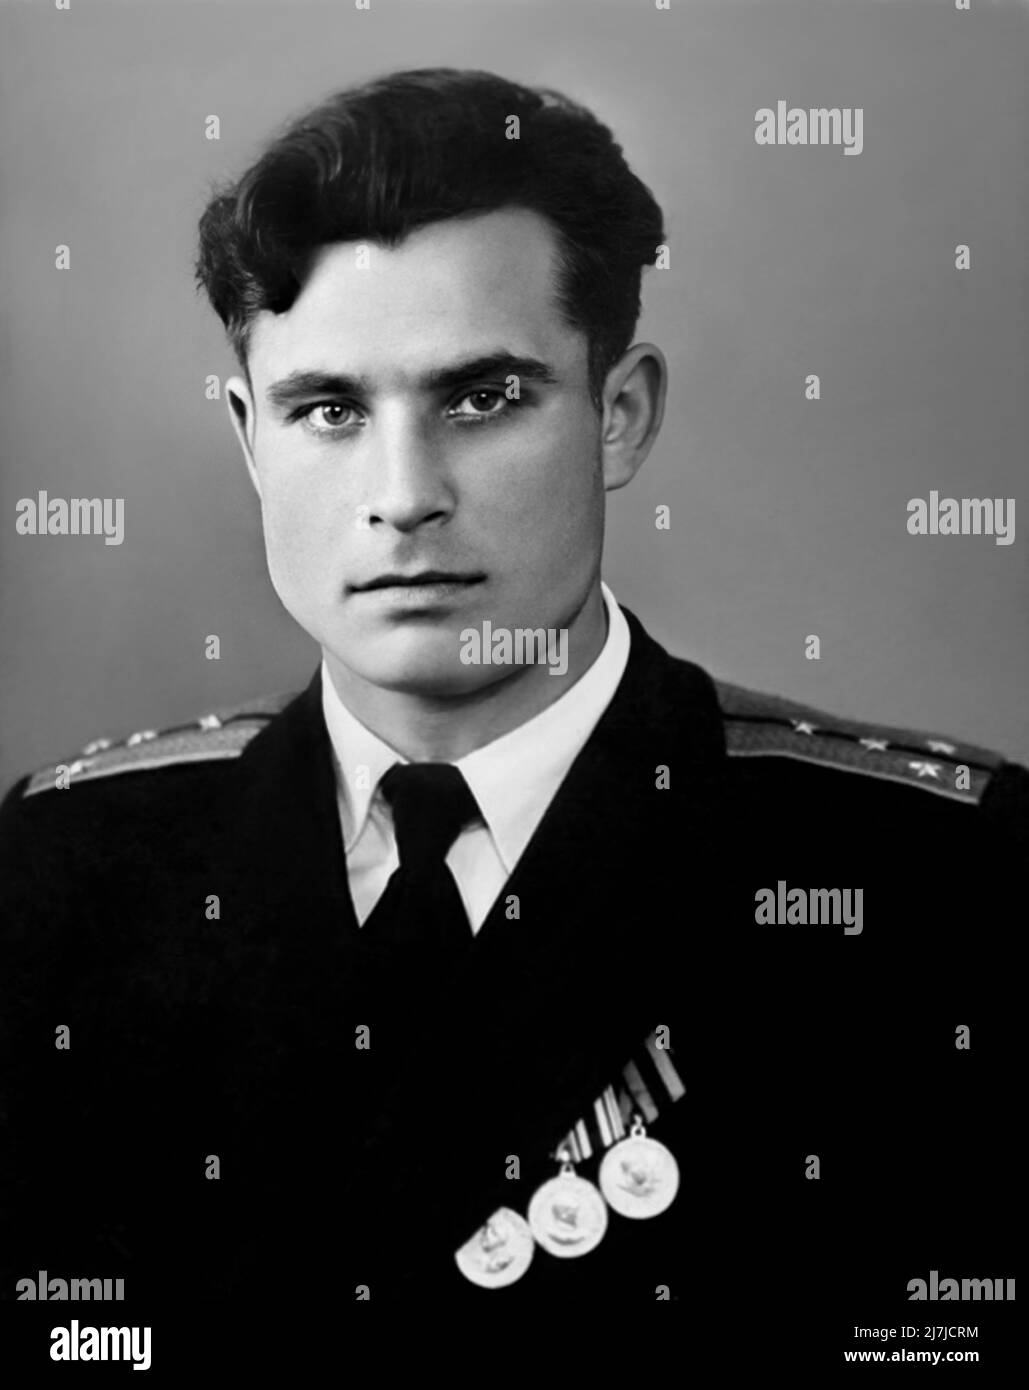 1955 , 17 february , RUSSIA : The communist military Soviet Navy officer hero VASILI ARKHIPOV ( Vasily Vasilij Aleksandrovic , 1926 - 1998 ). Was a Soviet Navy officer credited with preventing a Soviet nuclear launch ( and, potentially, all-out nuclear war ) during the Cuban Missile Crisis . Such an attack likely would have caused a major global thermonuclear response . As flotilla chief of staff and second-in-command of the diesel powered submarine B-59, Arkhipov refused to authorize the captain's use of nuclear torpedoes against the United States Navy, a decision requiring the agreement of a Stock Photo